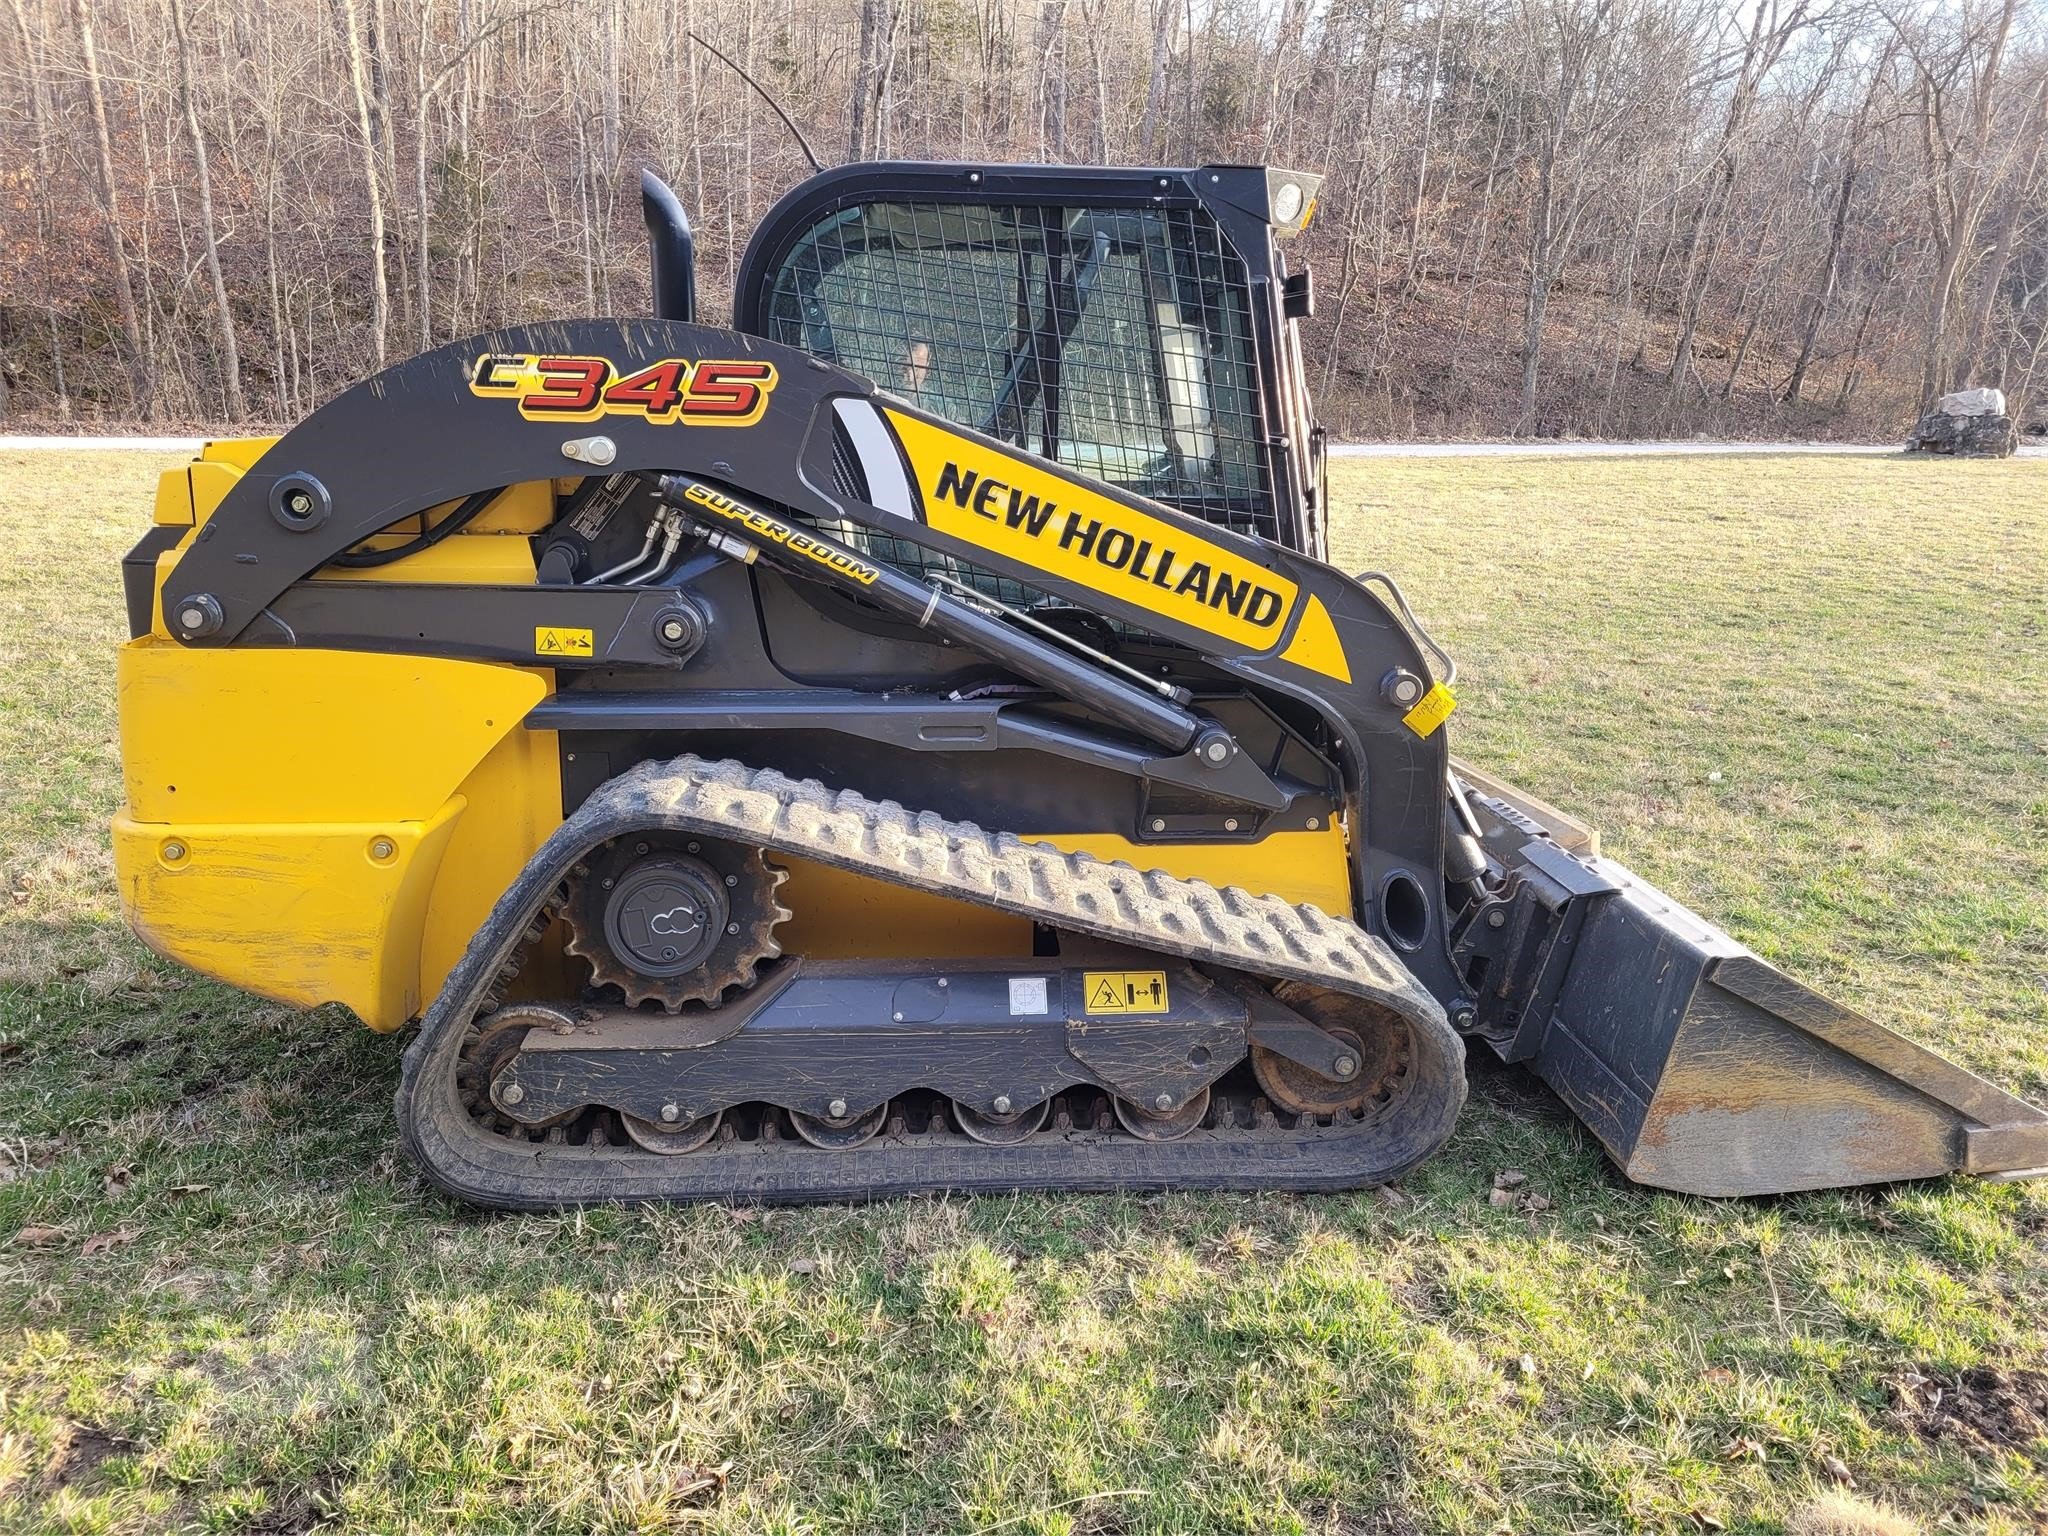 New Holland Compact Track Loader Tuning 2